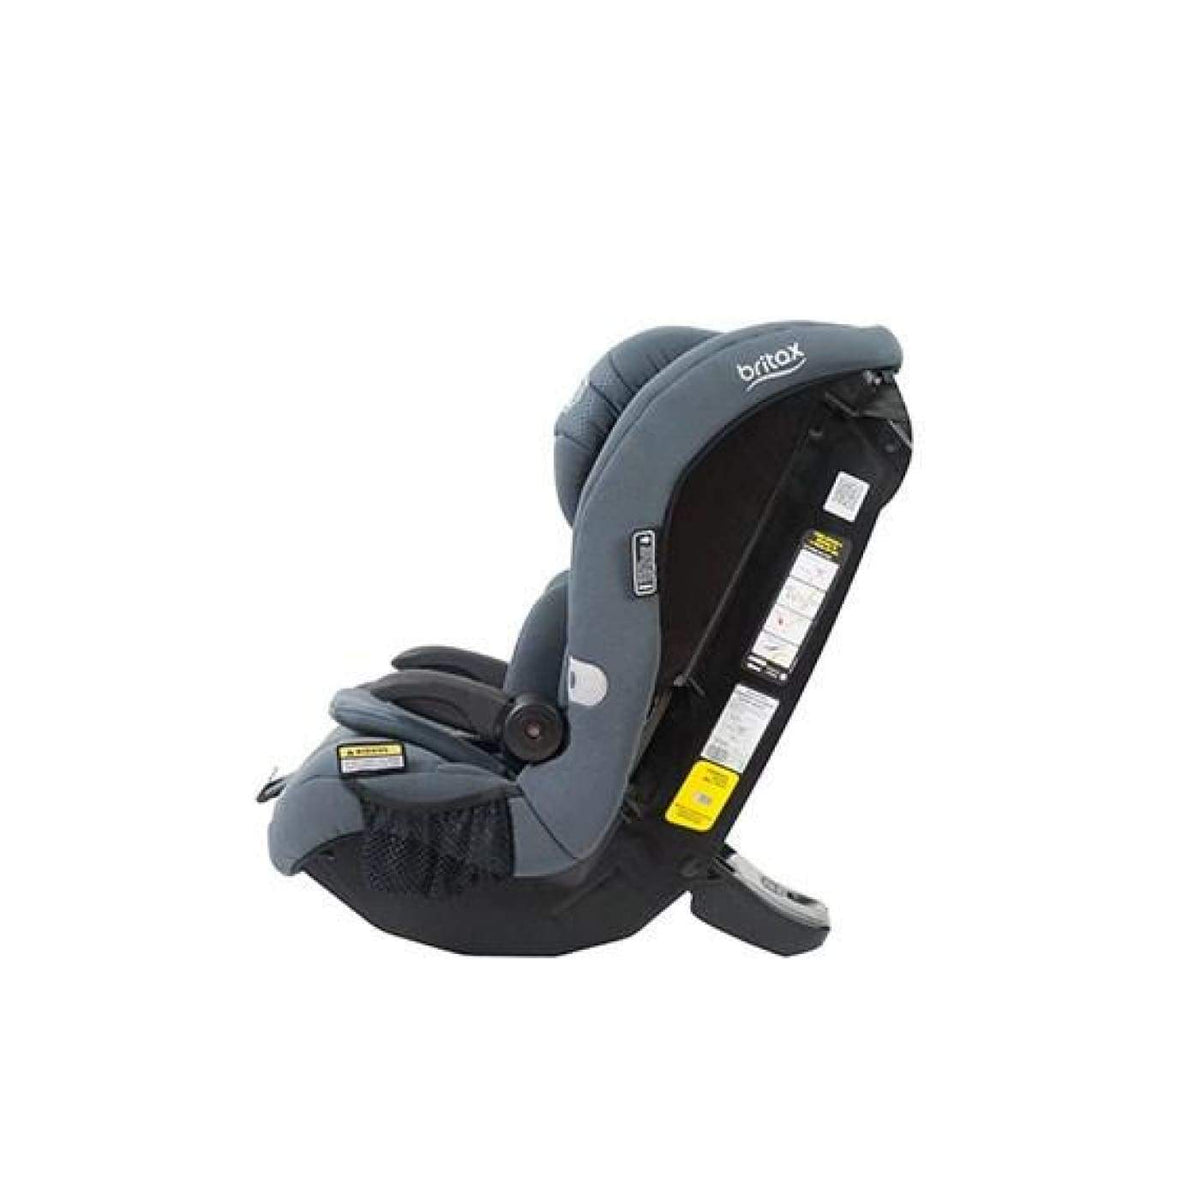 Britax SNS Maxi Guard Harnessed Booster 6M-8YR - Grey - CAR SEATS - HARNESSED BOOSTERS (6M-8YR)